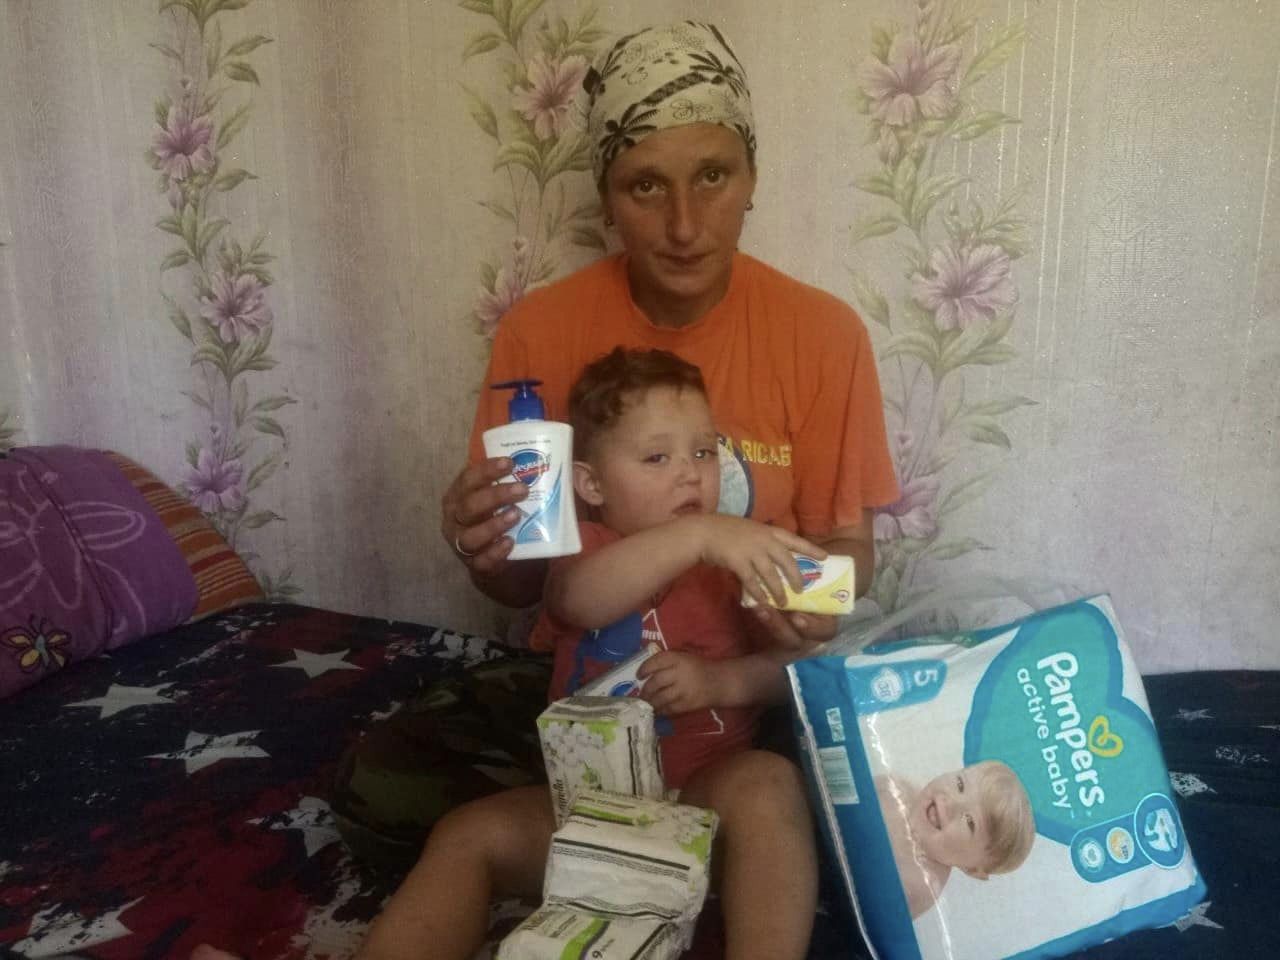 A woman and a child sitting on a bed with diapers.